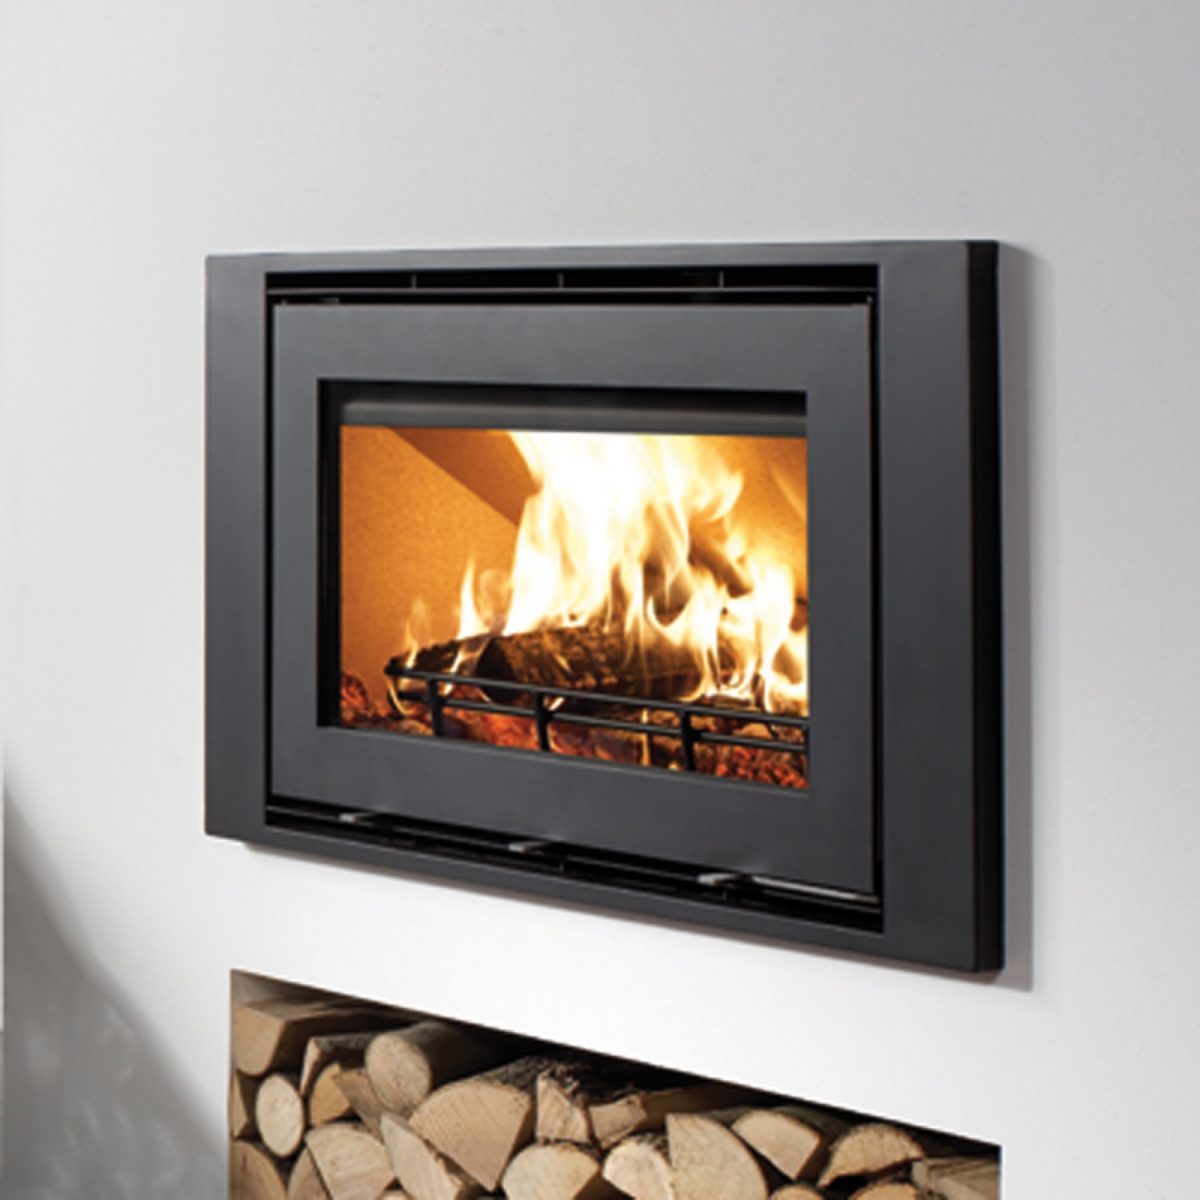 Westfire Uniq 32 Inset Wood Burning Stove with Wide Frame